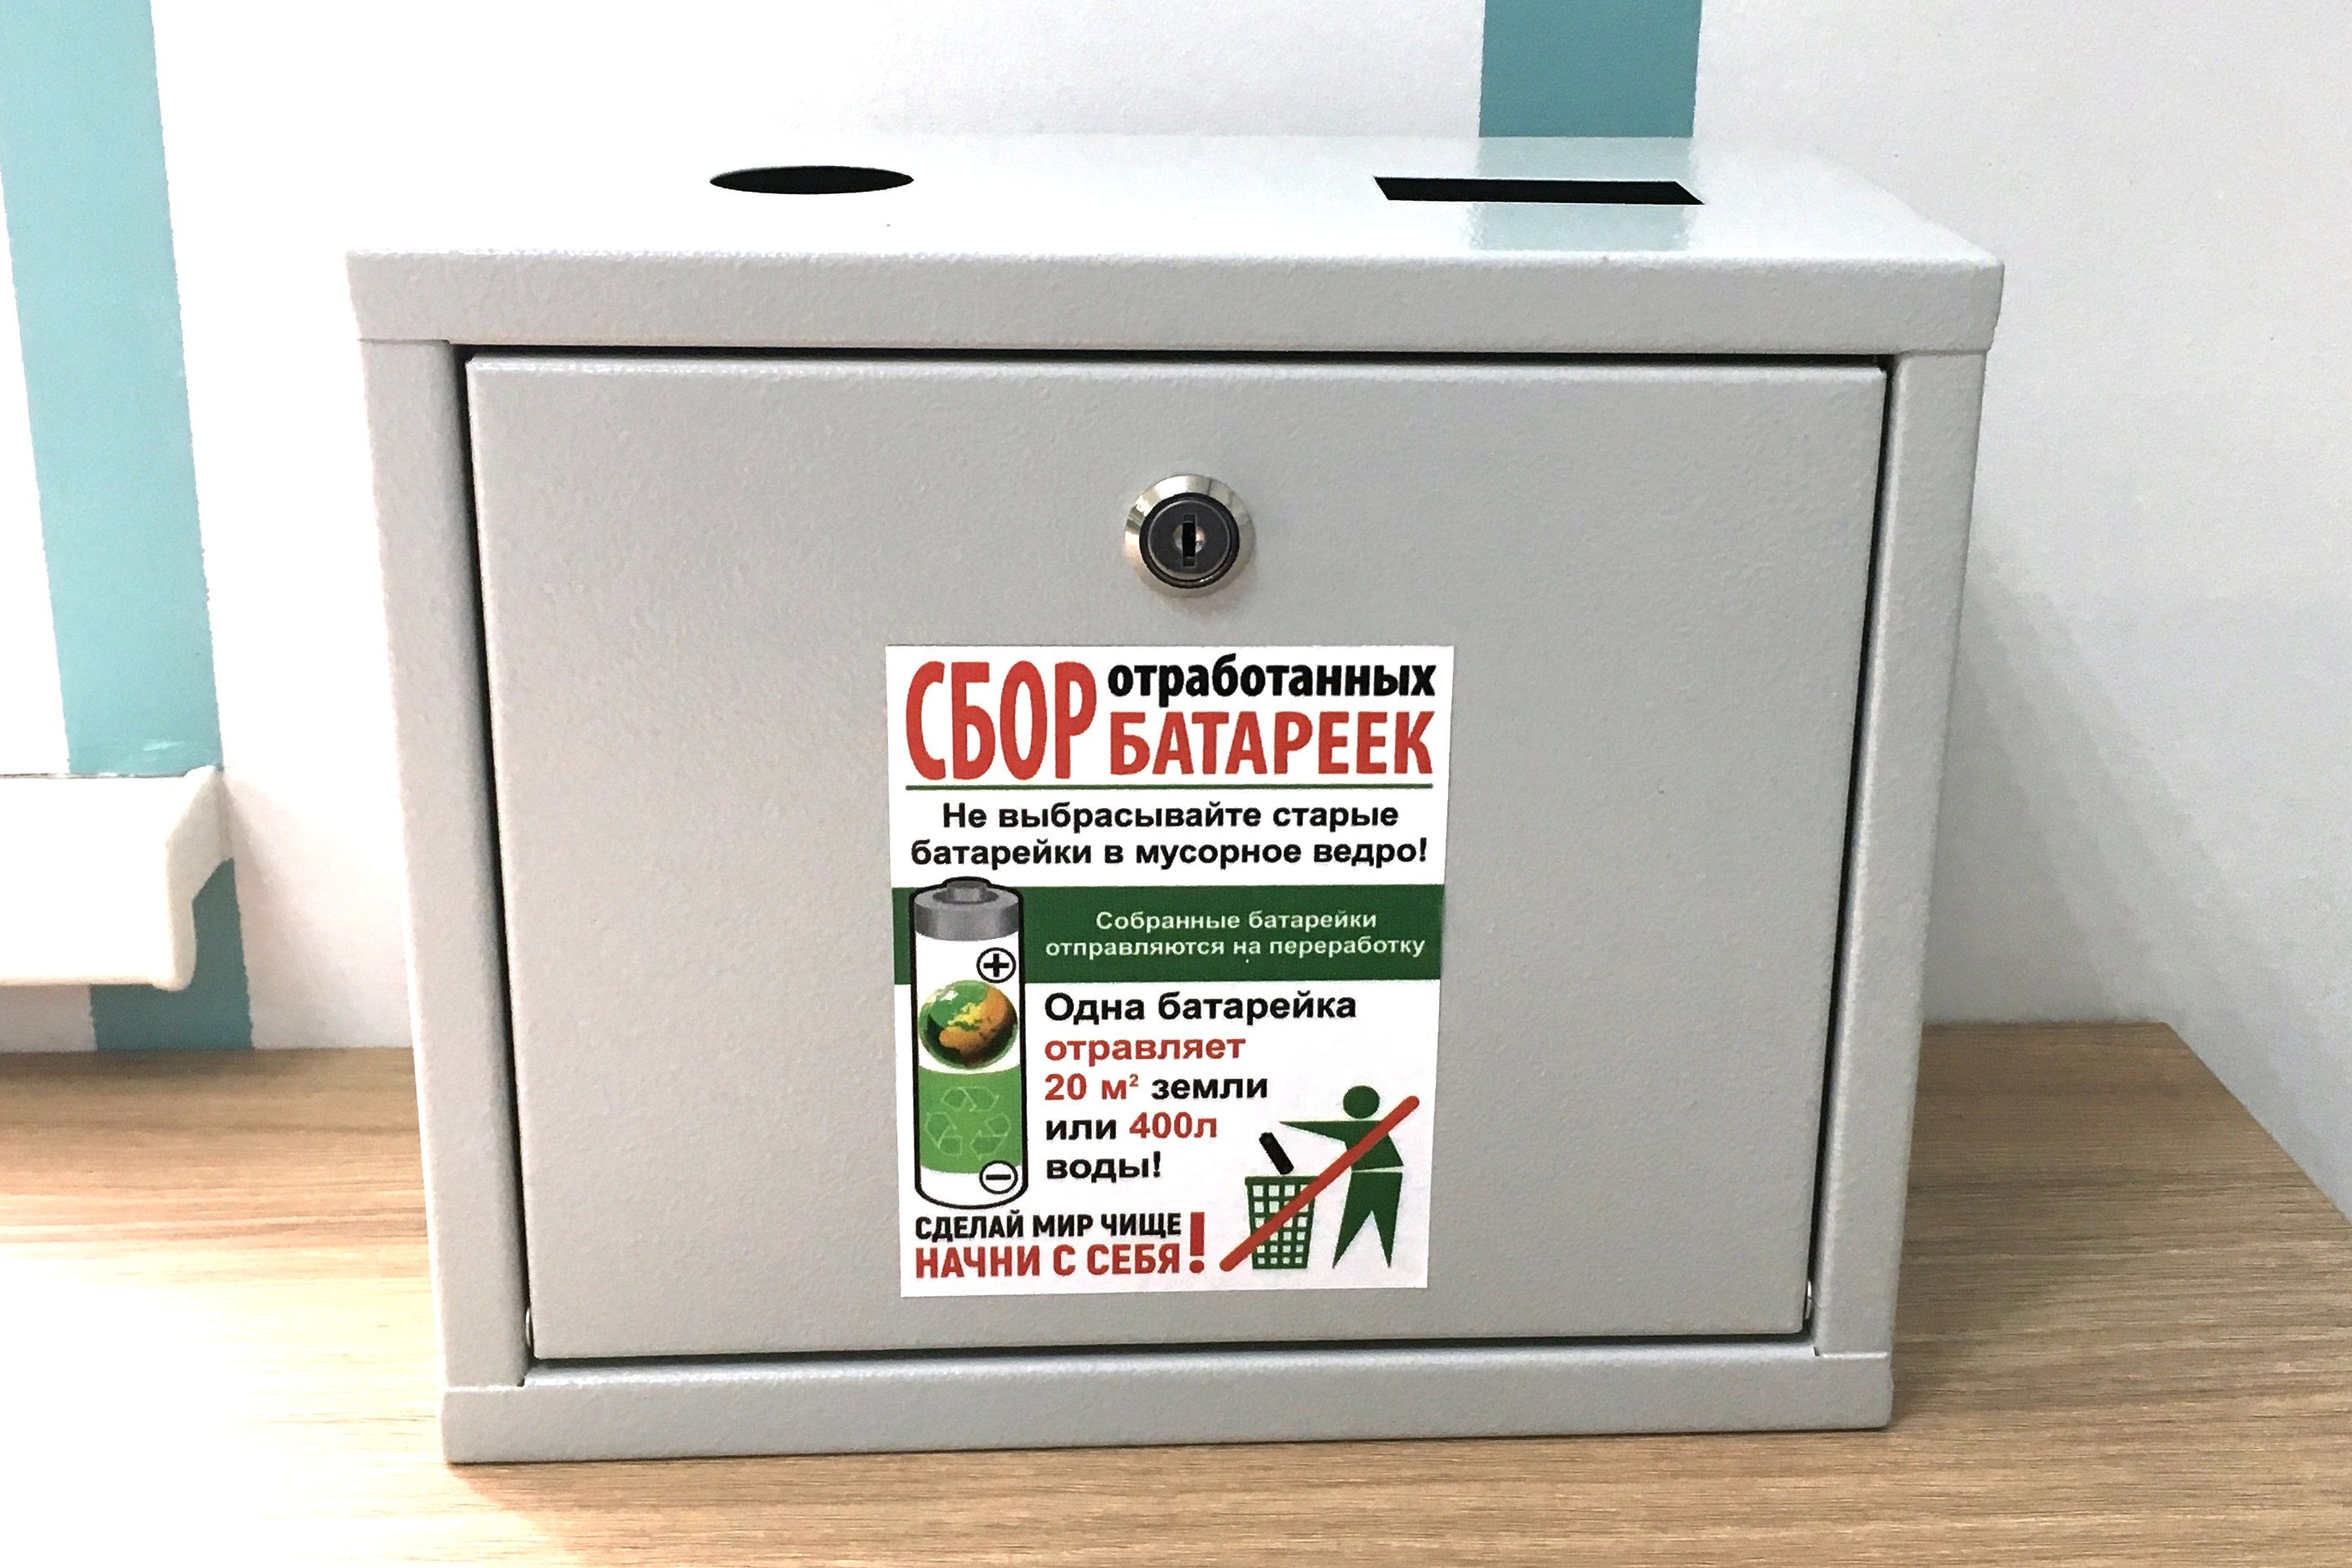 Collecting box for used batteries